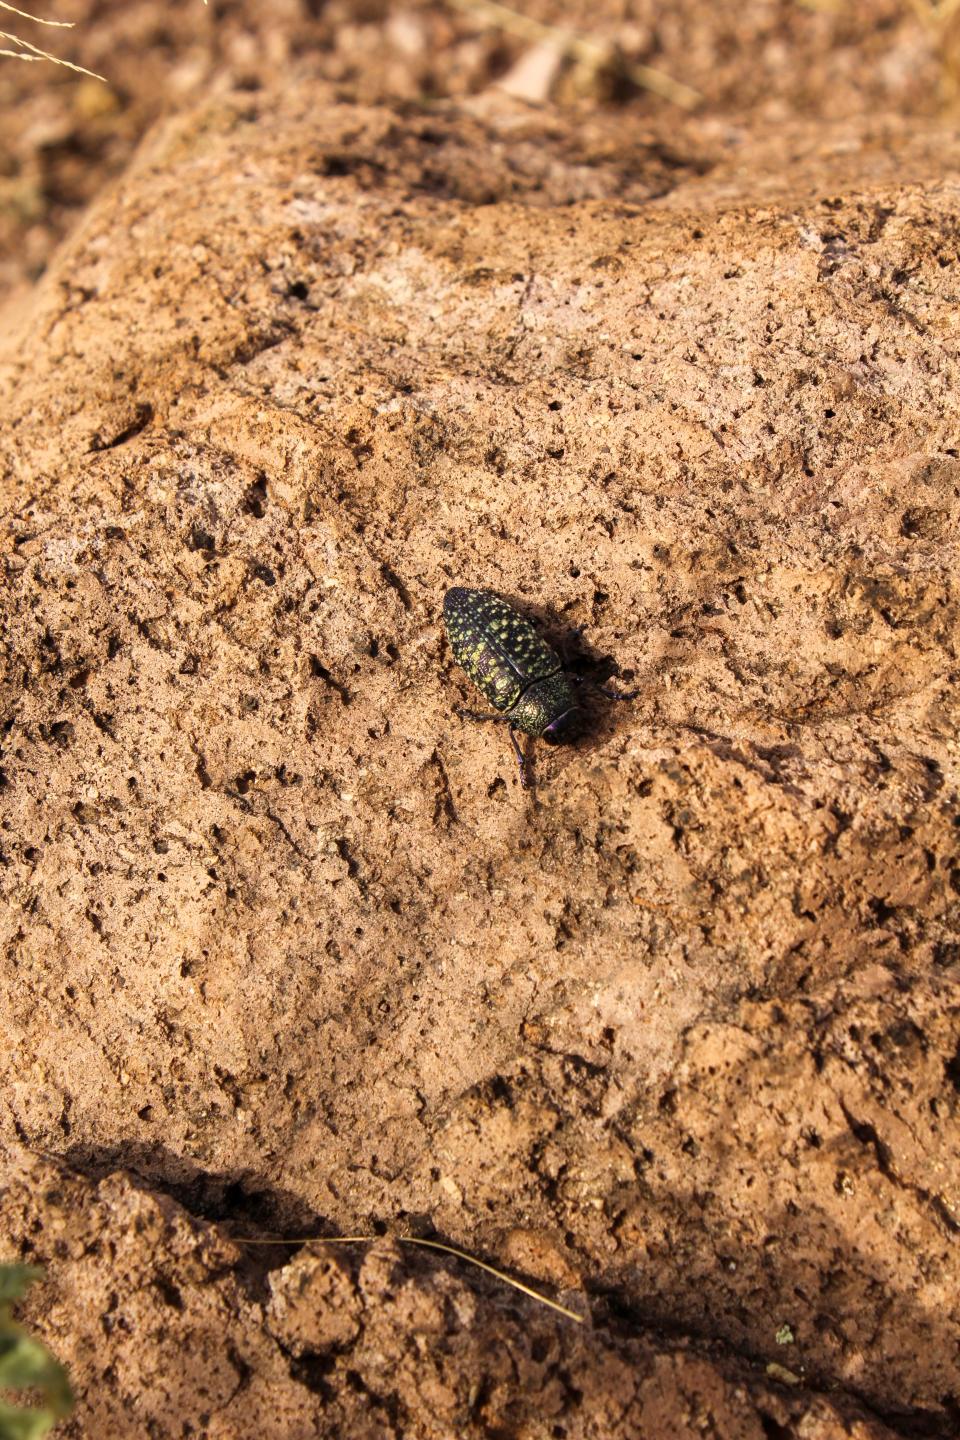 An insect crawls on a rock in Coconino National Forest, a reminder of the wildlife that remains following the Backbone Fire.